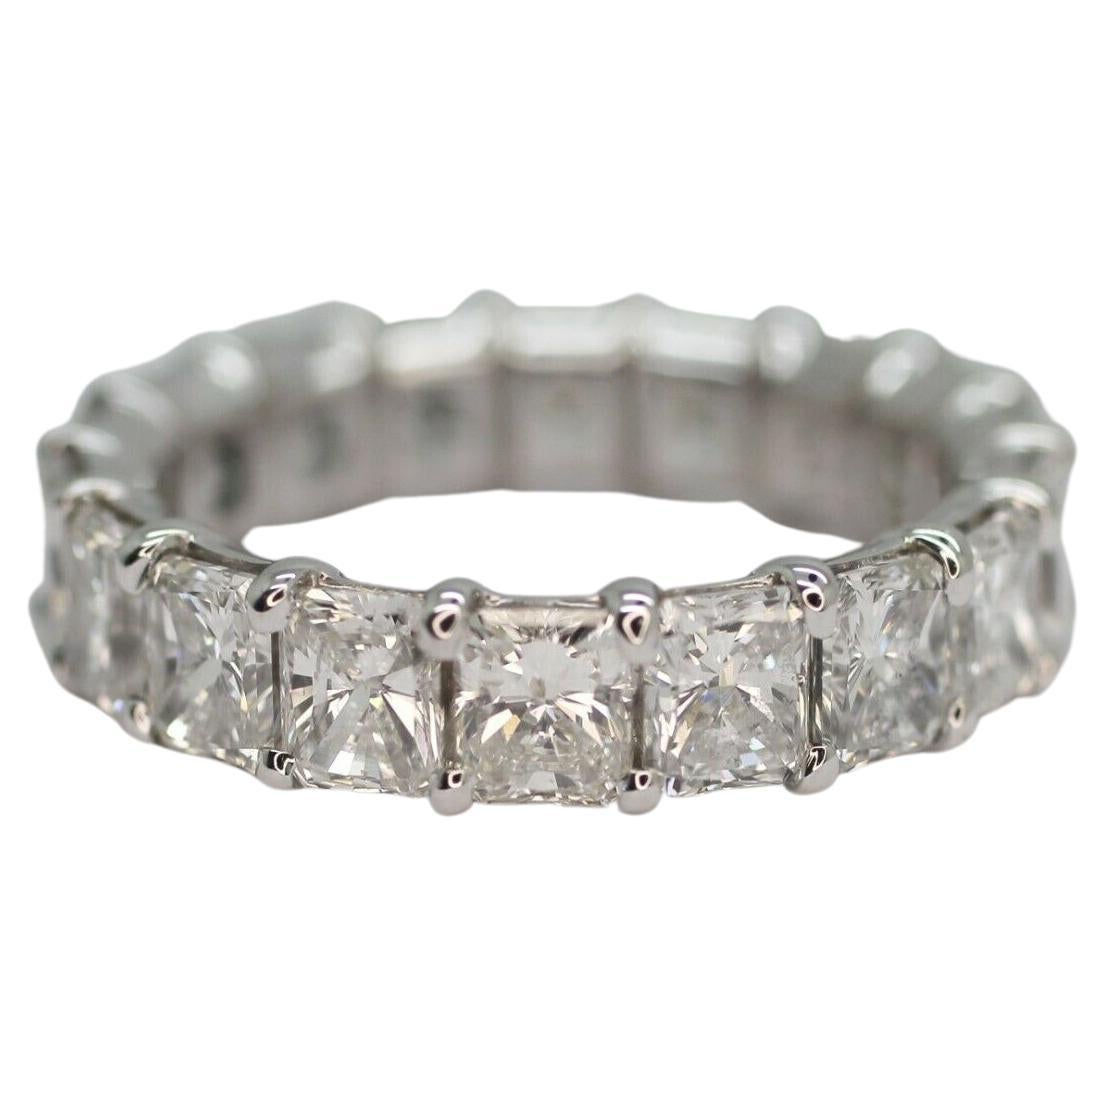 Radiant Cut Diamond 5.67cts. Eternity Ring Set in 14k White Gold For Sale